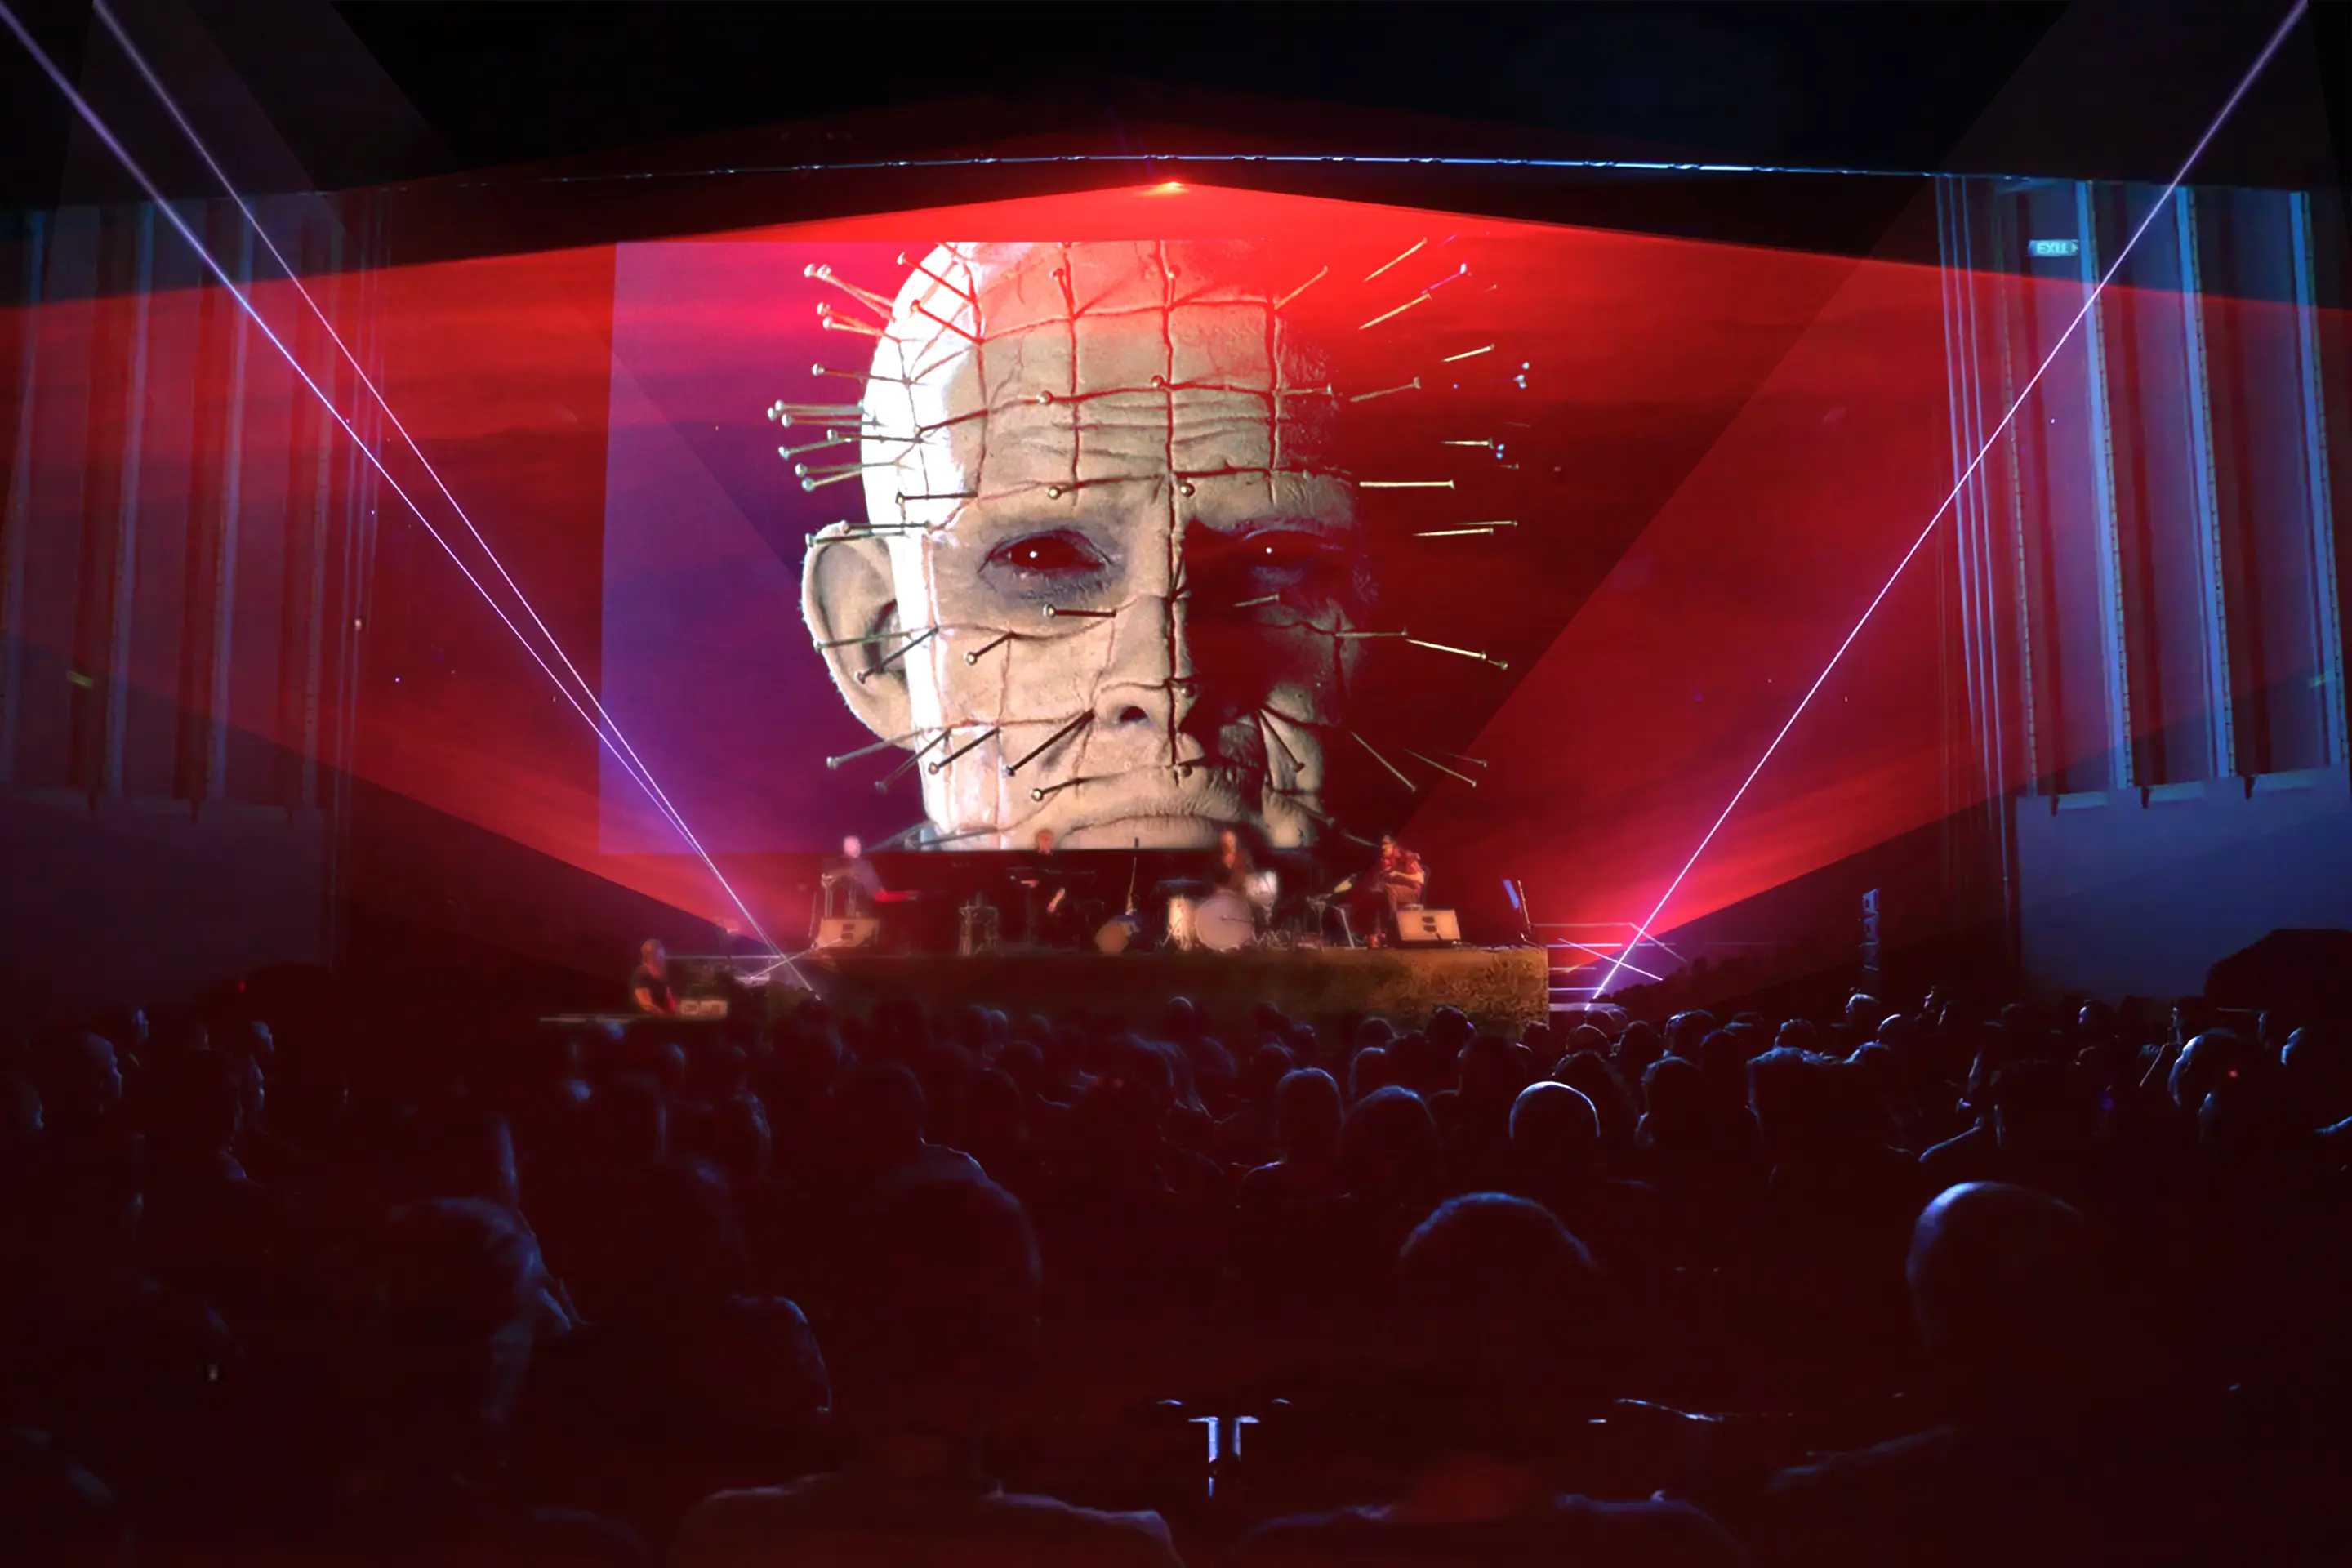 A theatre full of people watching a film screen featuring a still of Hellraiser. A band performs on stage and lasers light up in front of the screen.